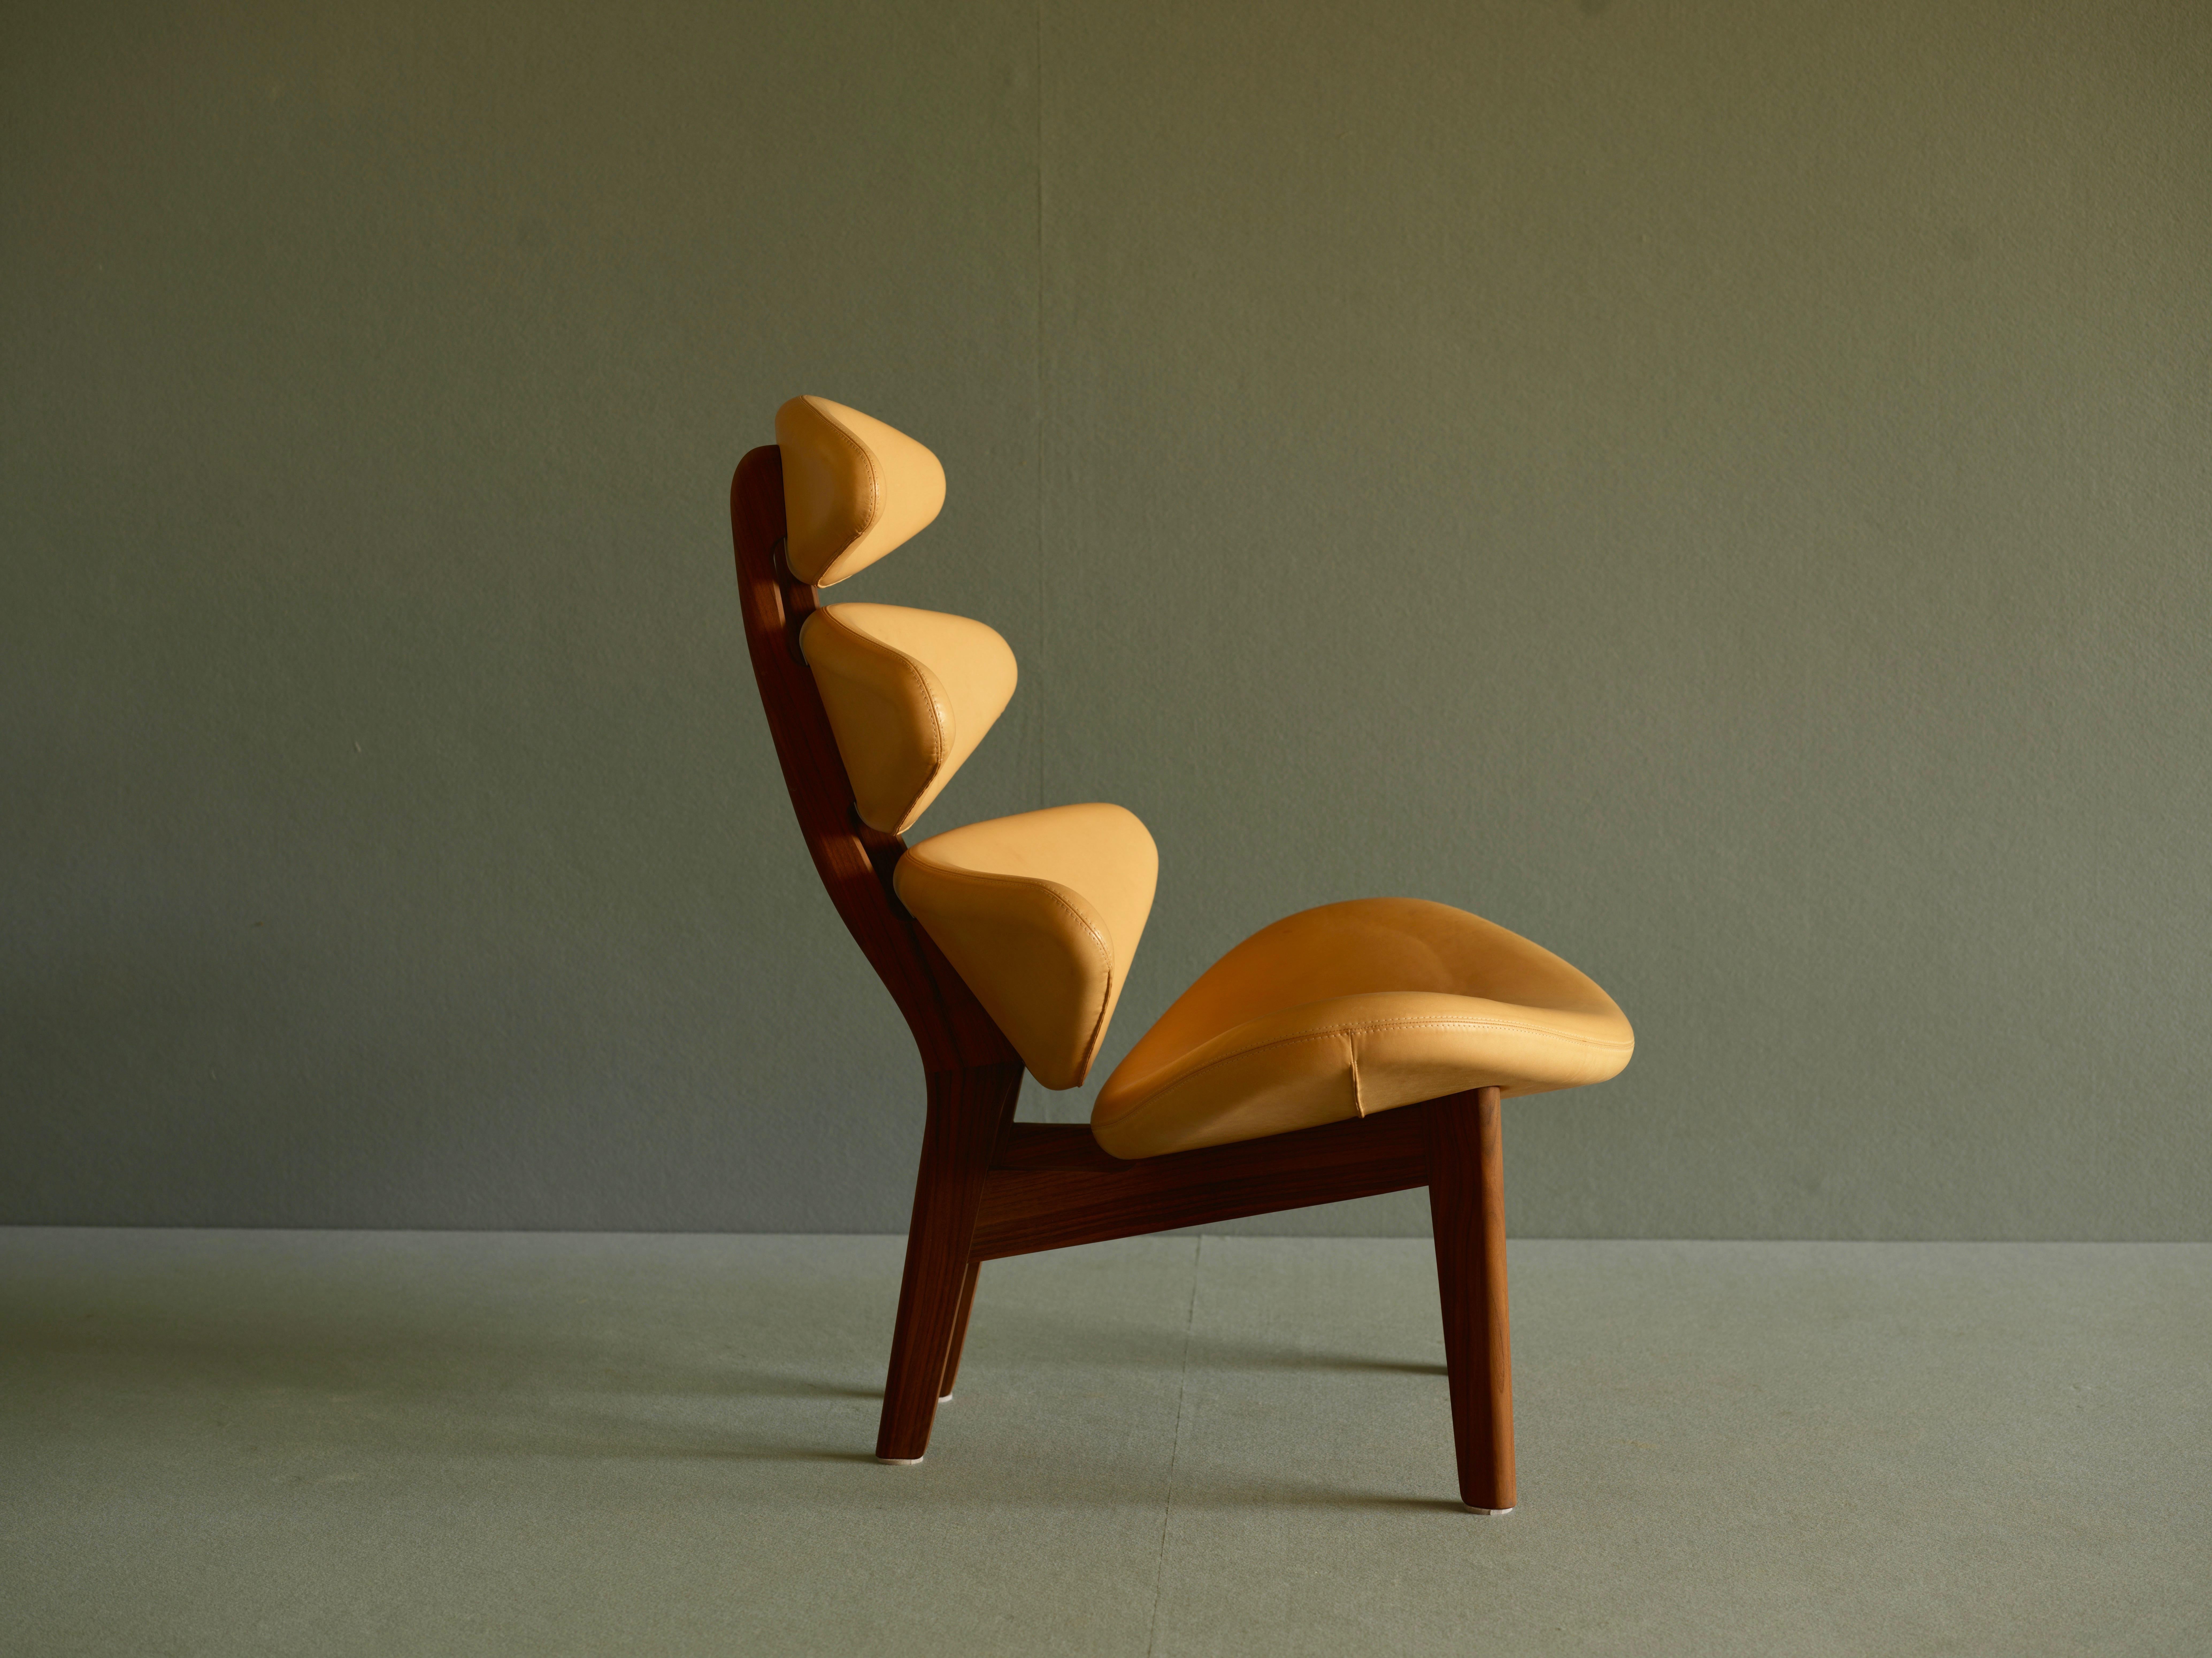 Chair by Poul M. Volther. Corona EJ-5 Classic for Erik Jorgensen. This is the Anniversary model. The frame is in untreated, solid walnut and the seat upholstered in vegetable natural leather.

Volther’s “Corona” chair was unveiled in 1961.